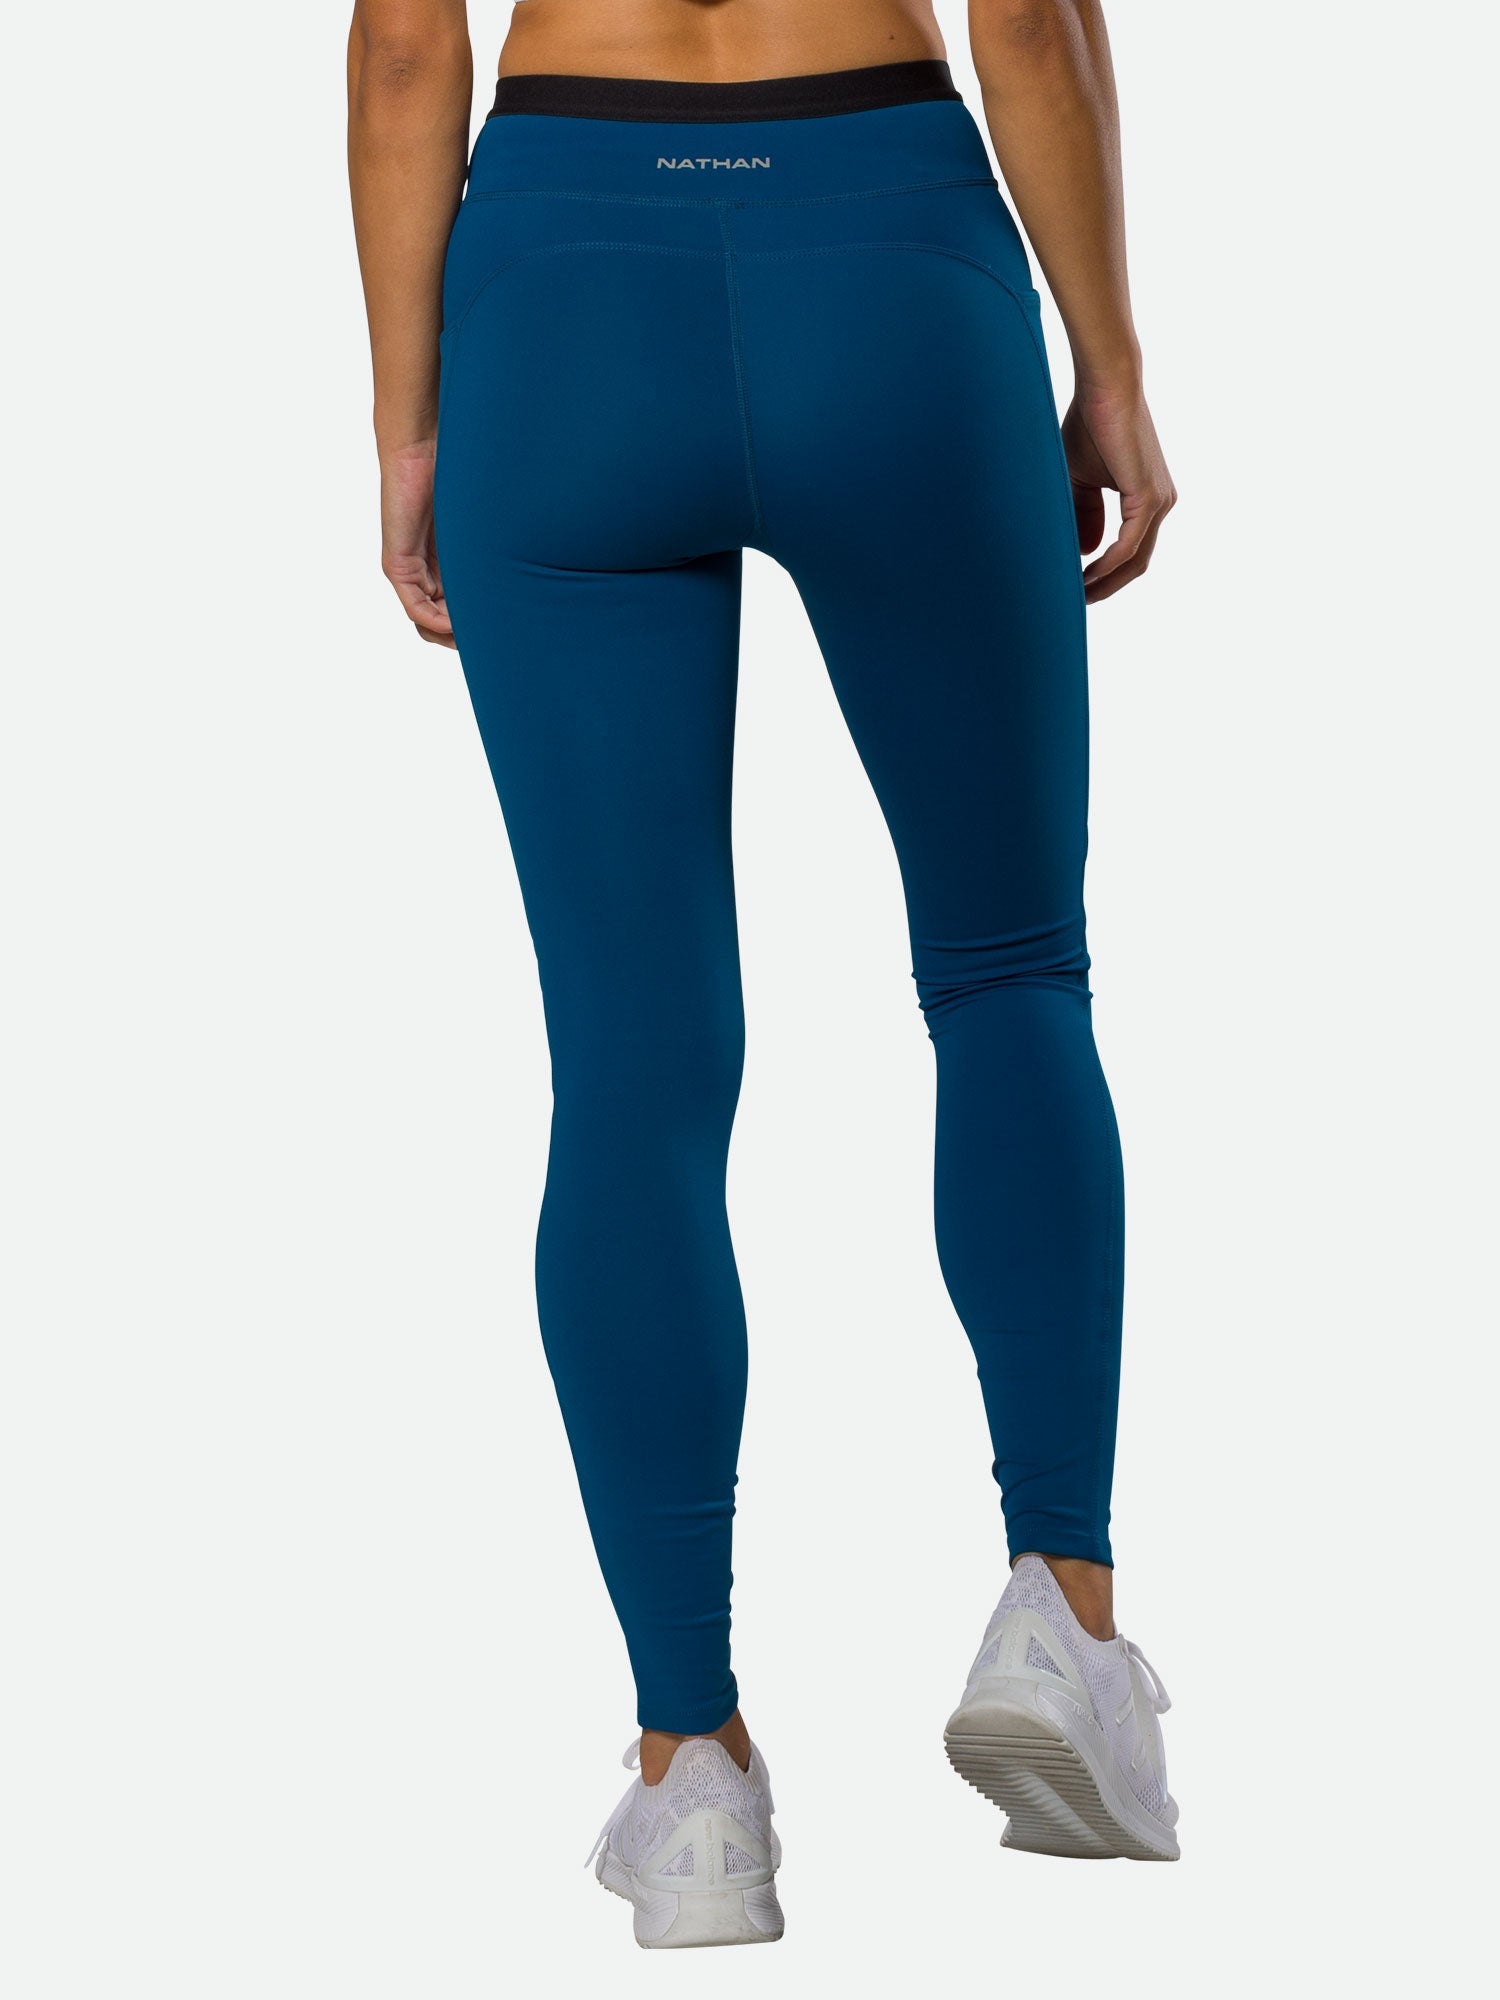 Women's Nathan Crossover Tights, Free Shipping $99+